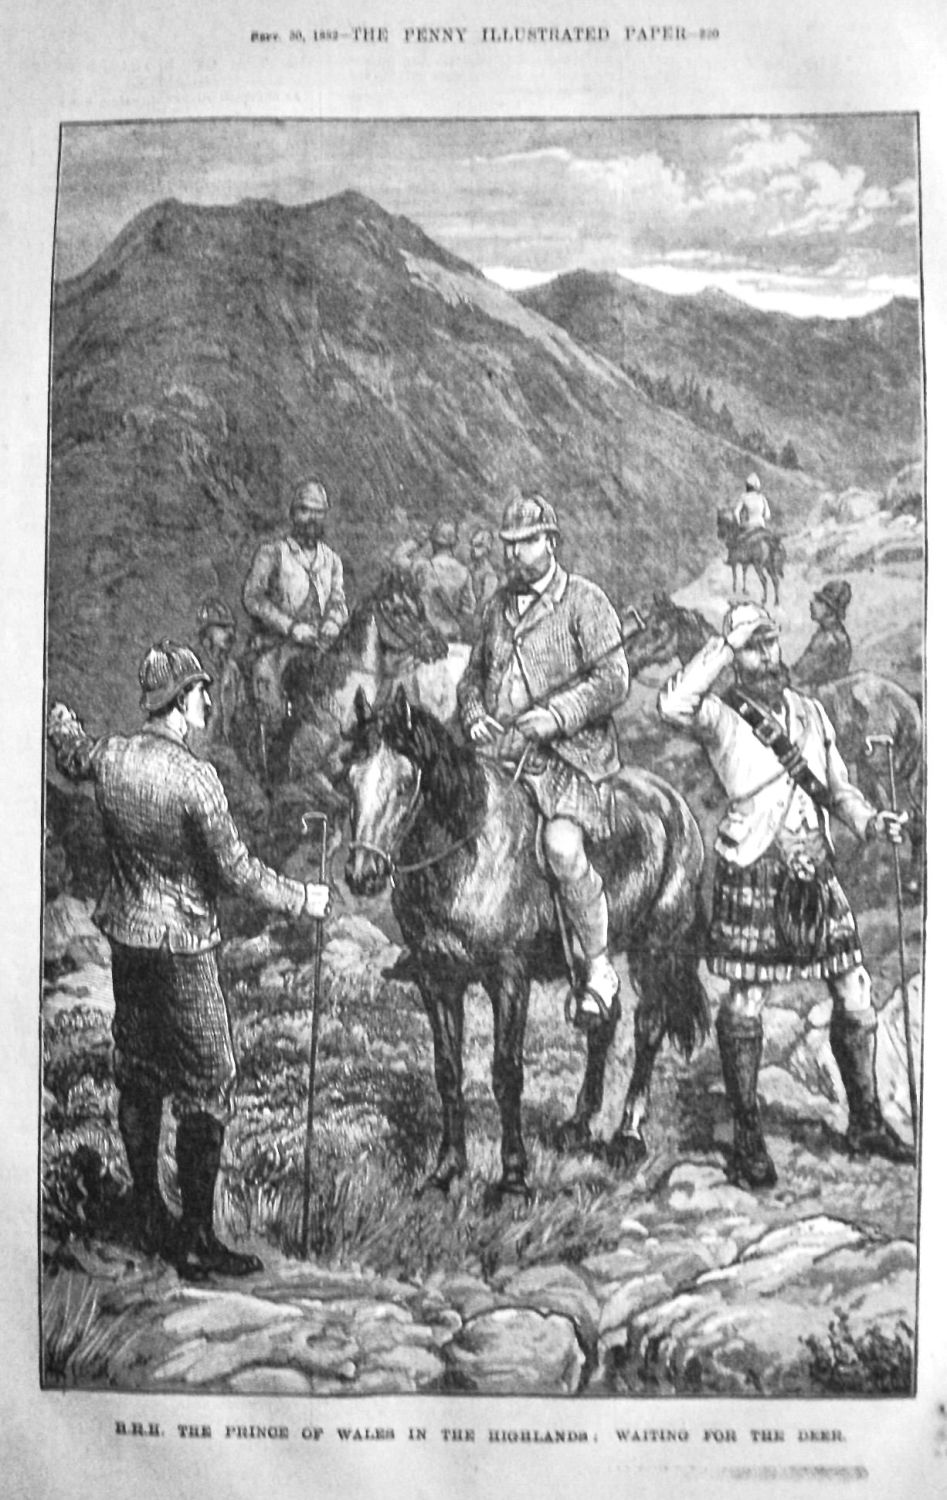 H.R.H. The Prince of Wales in the Highlands :  Waiting for the Deer.  1882.